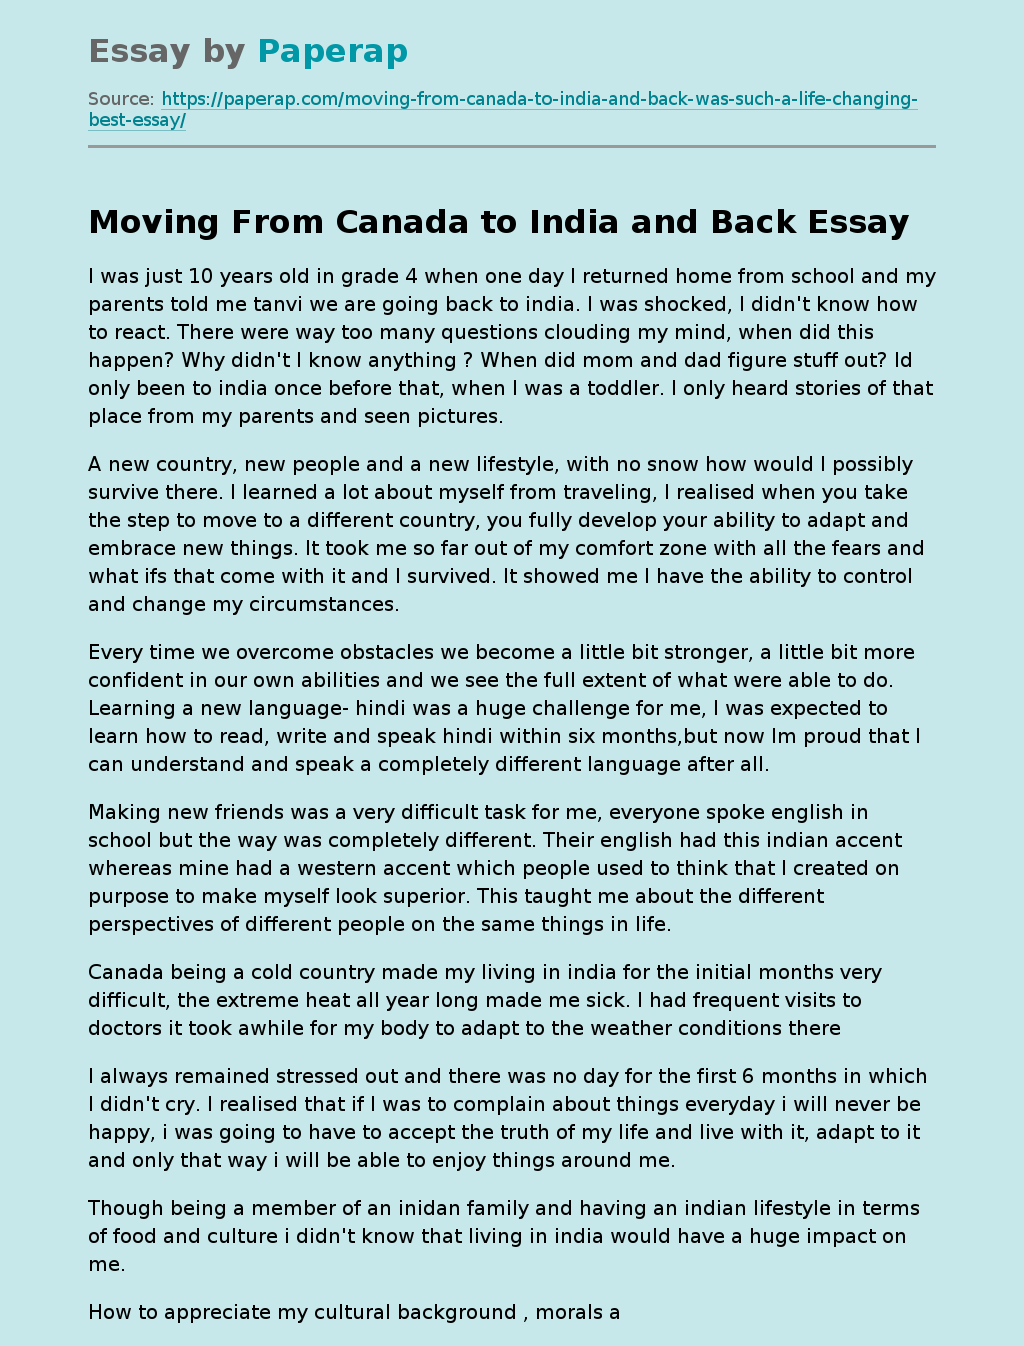 Moving From Canada to India and Back